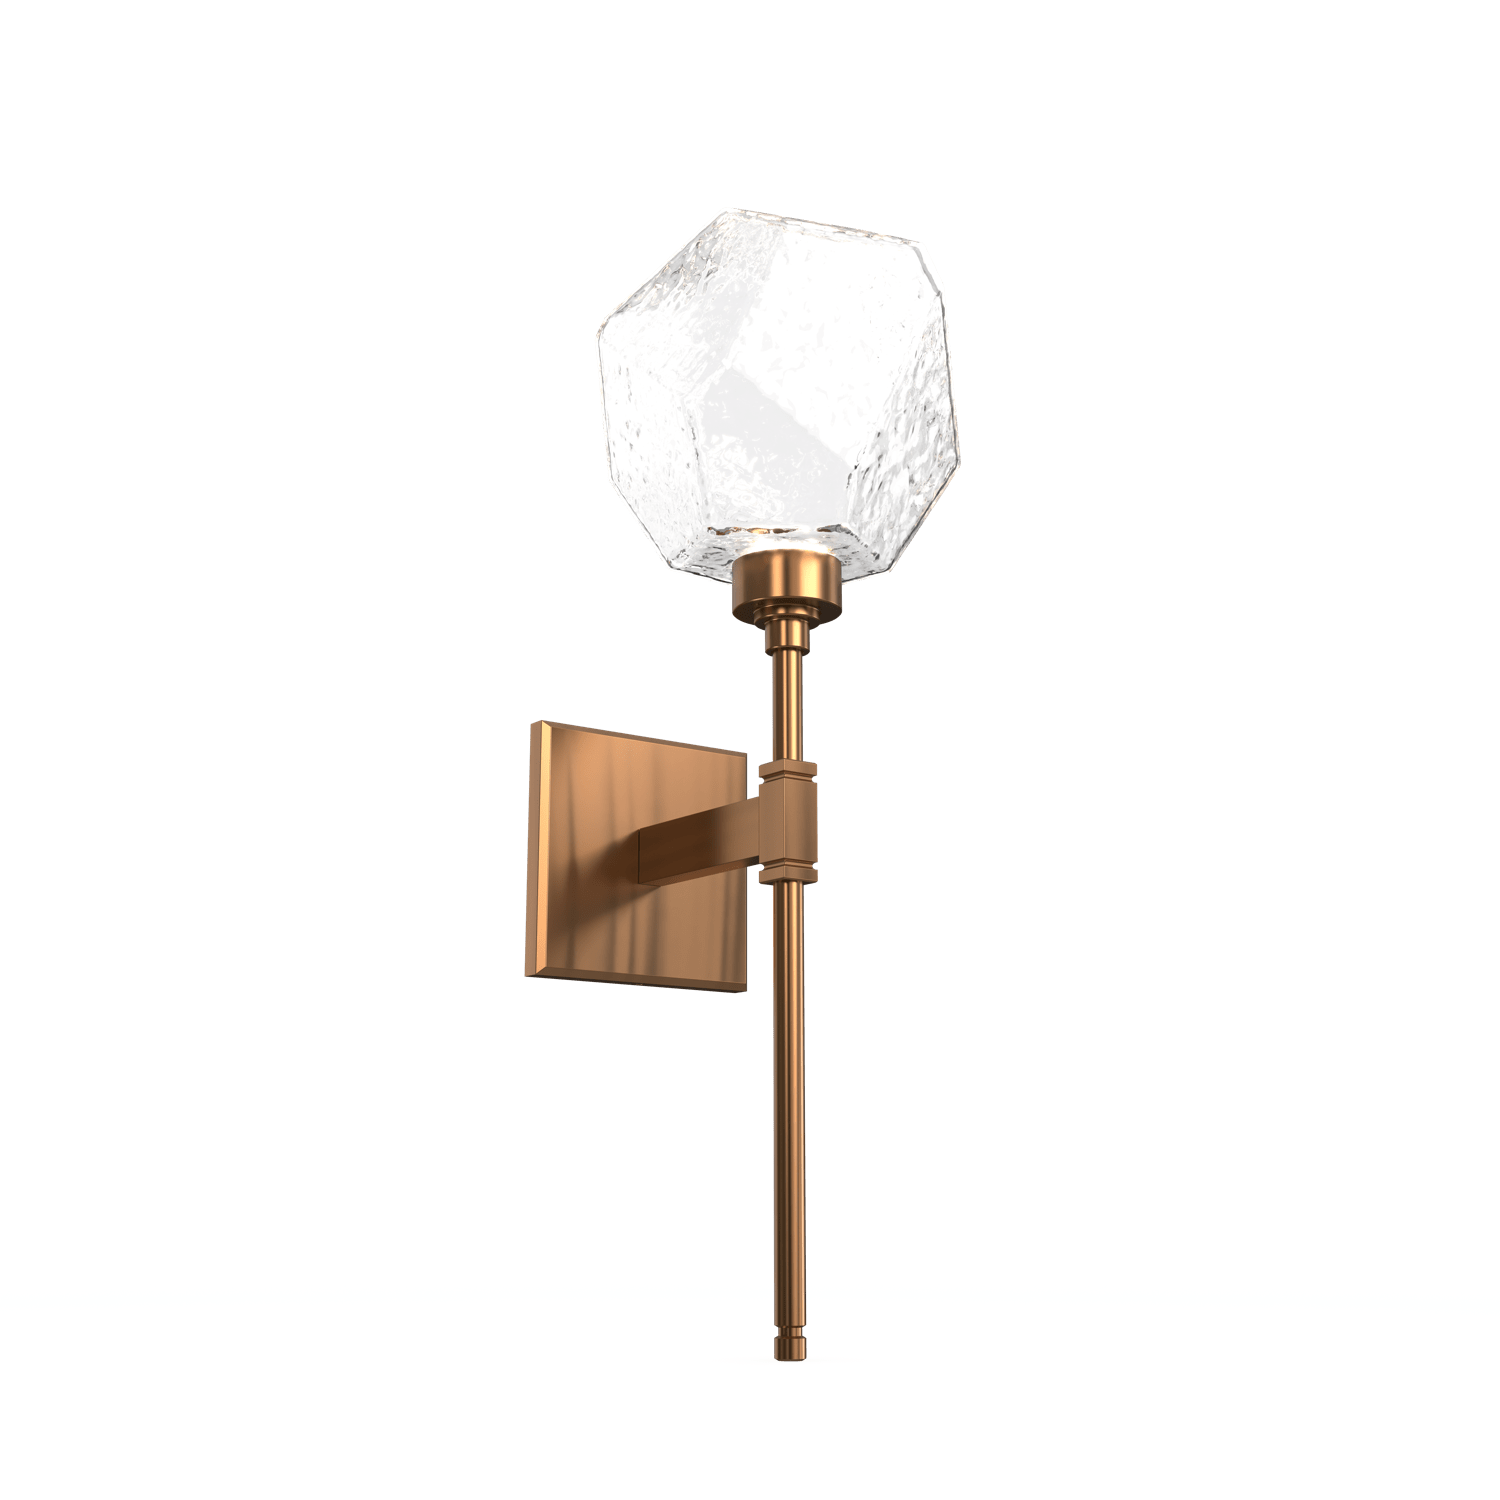 IDB0039-08-RB-C-Hammerton-Studio-Gem-belvedere-wall-sconce-with-oil-rubbed-bronze-finish-and-clear-blown-glass-shades-and-LED-lamping